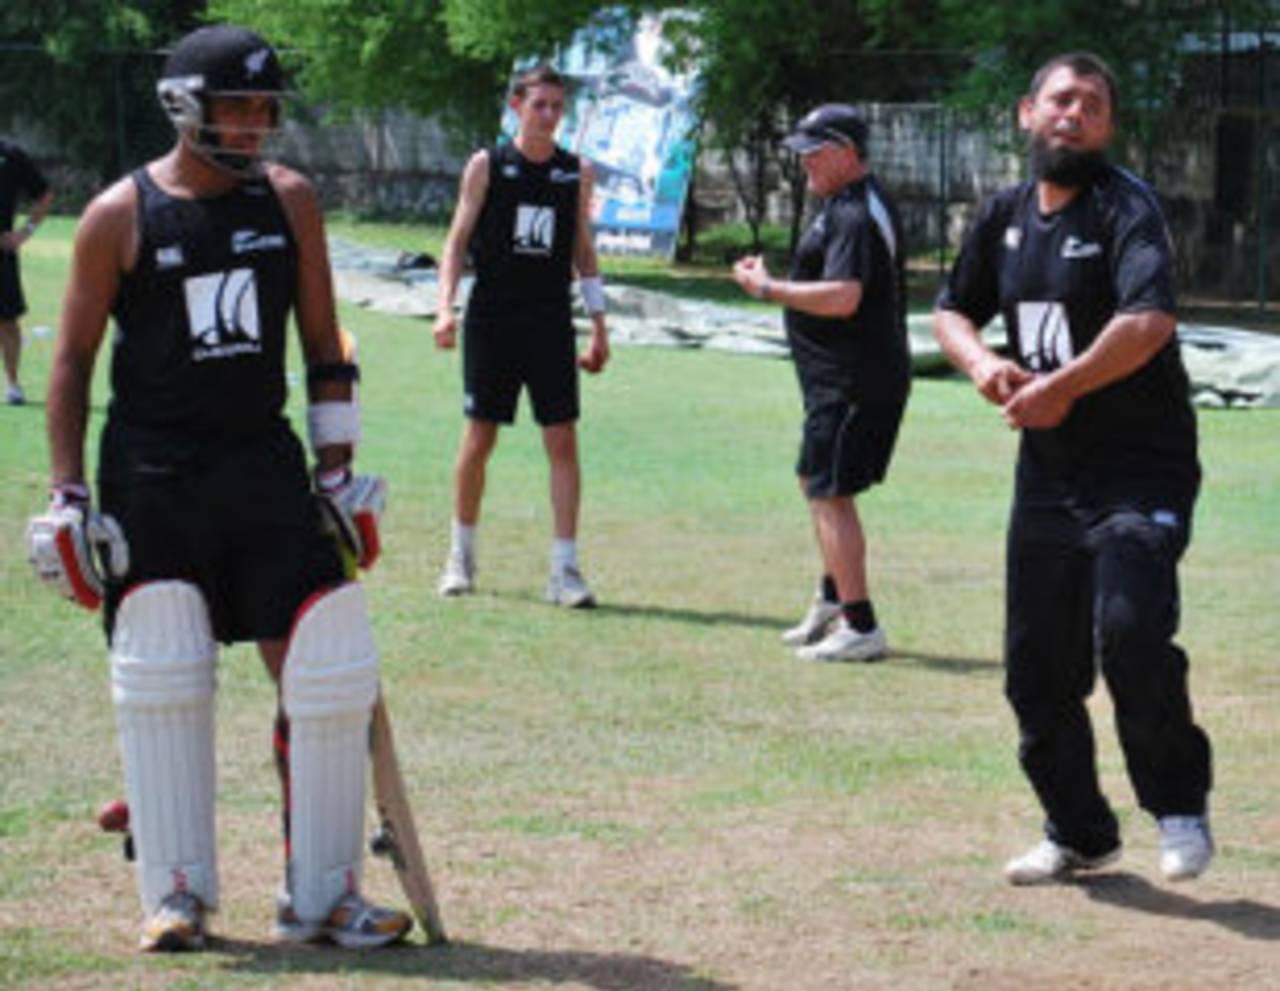 Maurice Holmes was first spotted by New Zealand during the World Twenty20 and made a sound impression. He has already spent time with Saqlain Mushtaq in the nets&nbsp;&nbsp;&bull;&nbsp;&nbsp;ESPNcricinfo Ltd